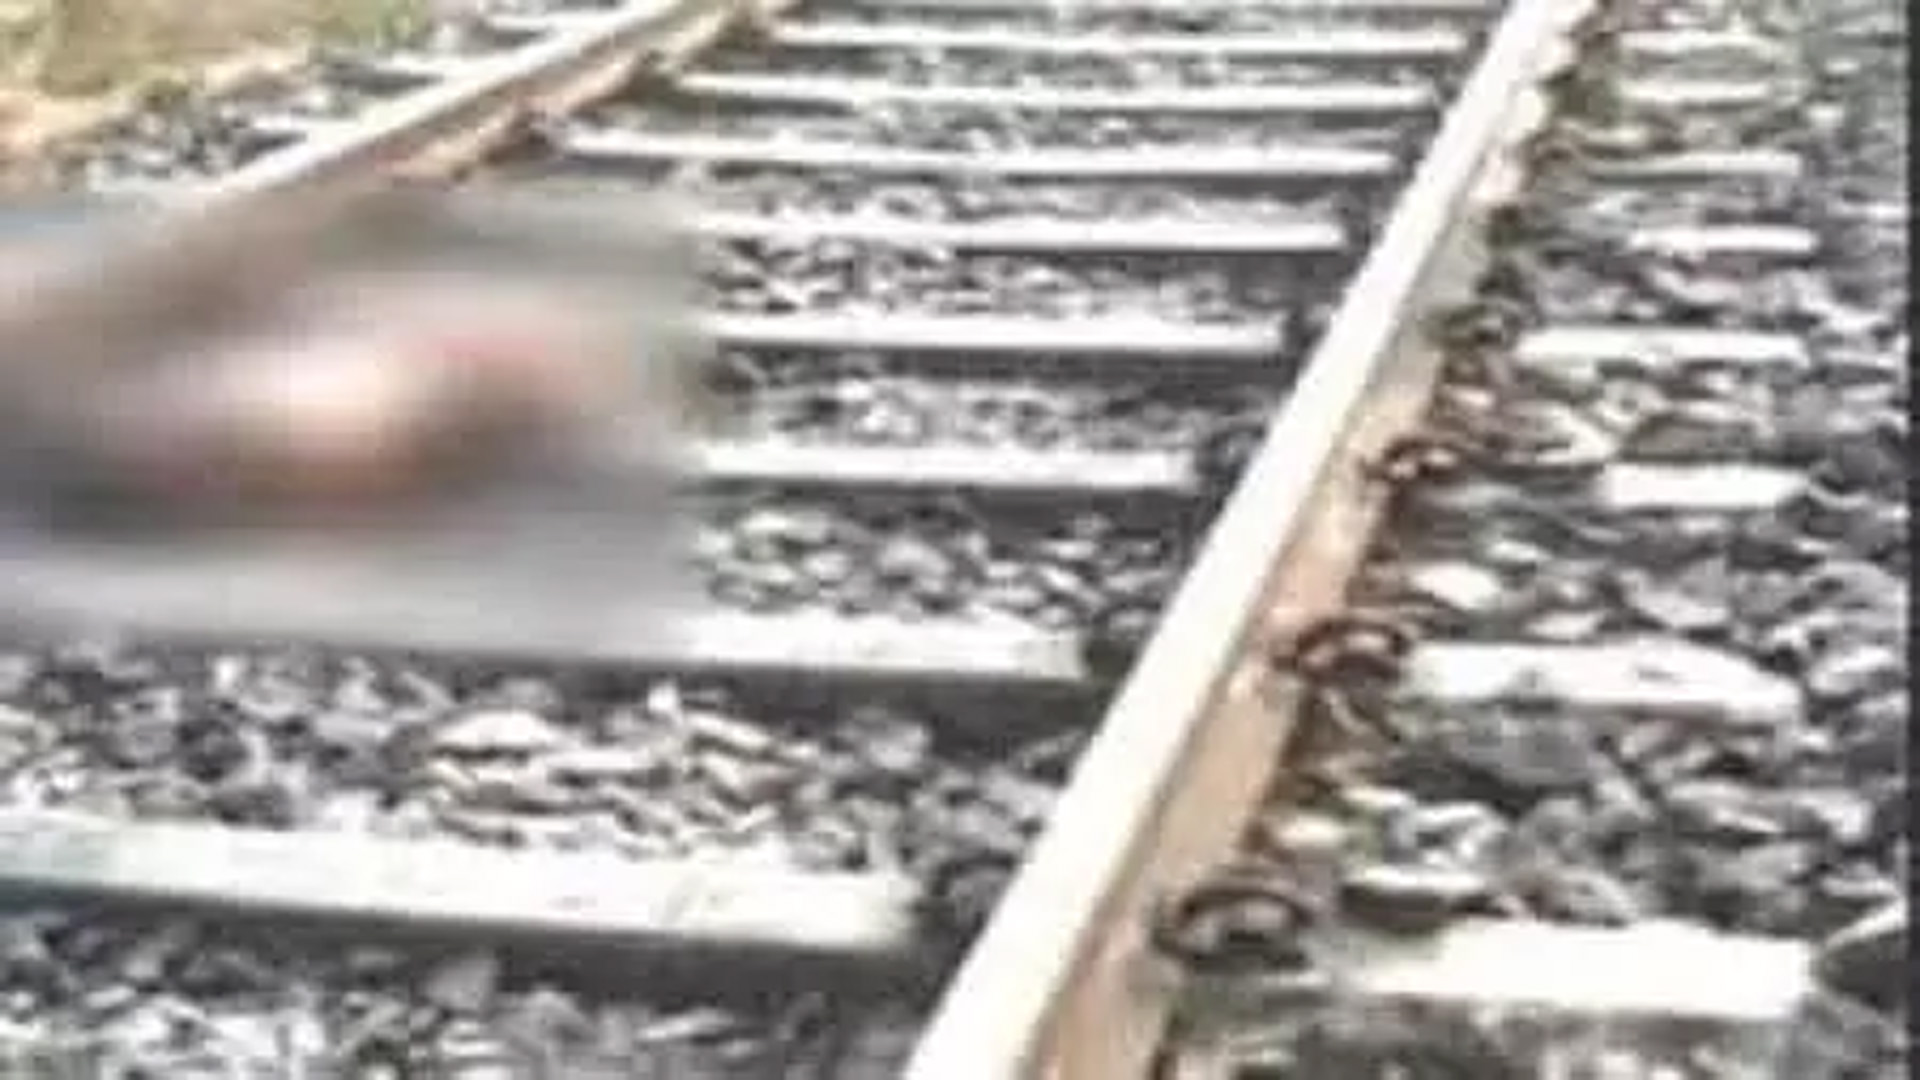 45 year old middle aged man dies after being hit by train